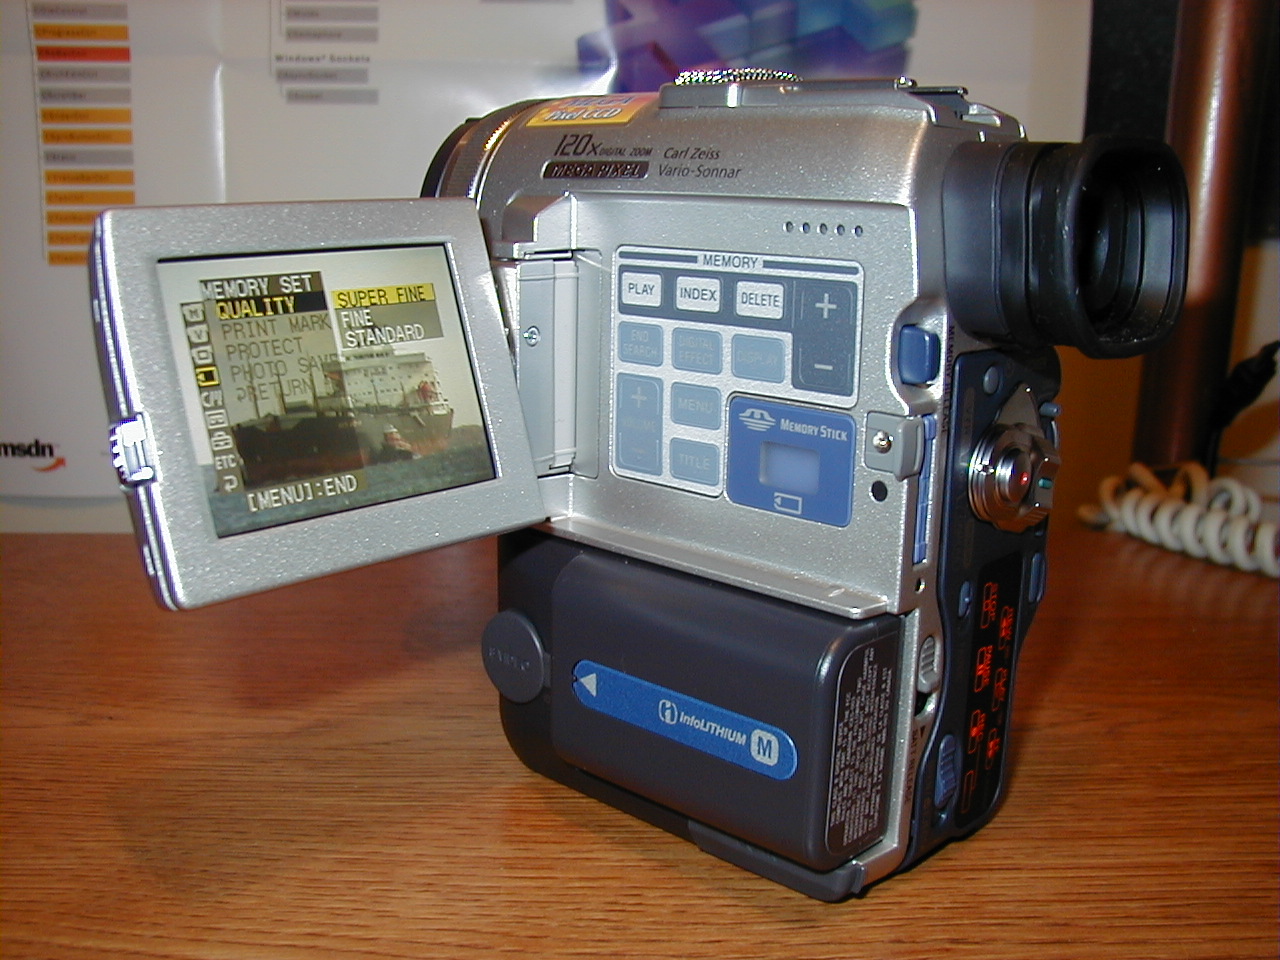 Digital Camcorders - Sony's DCR-PC100 User Review